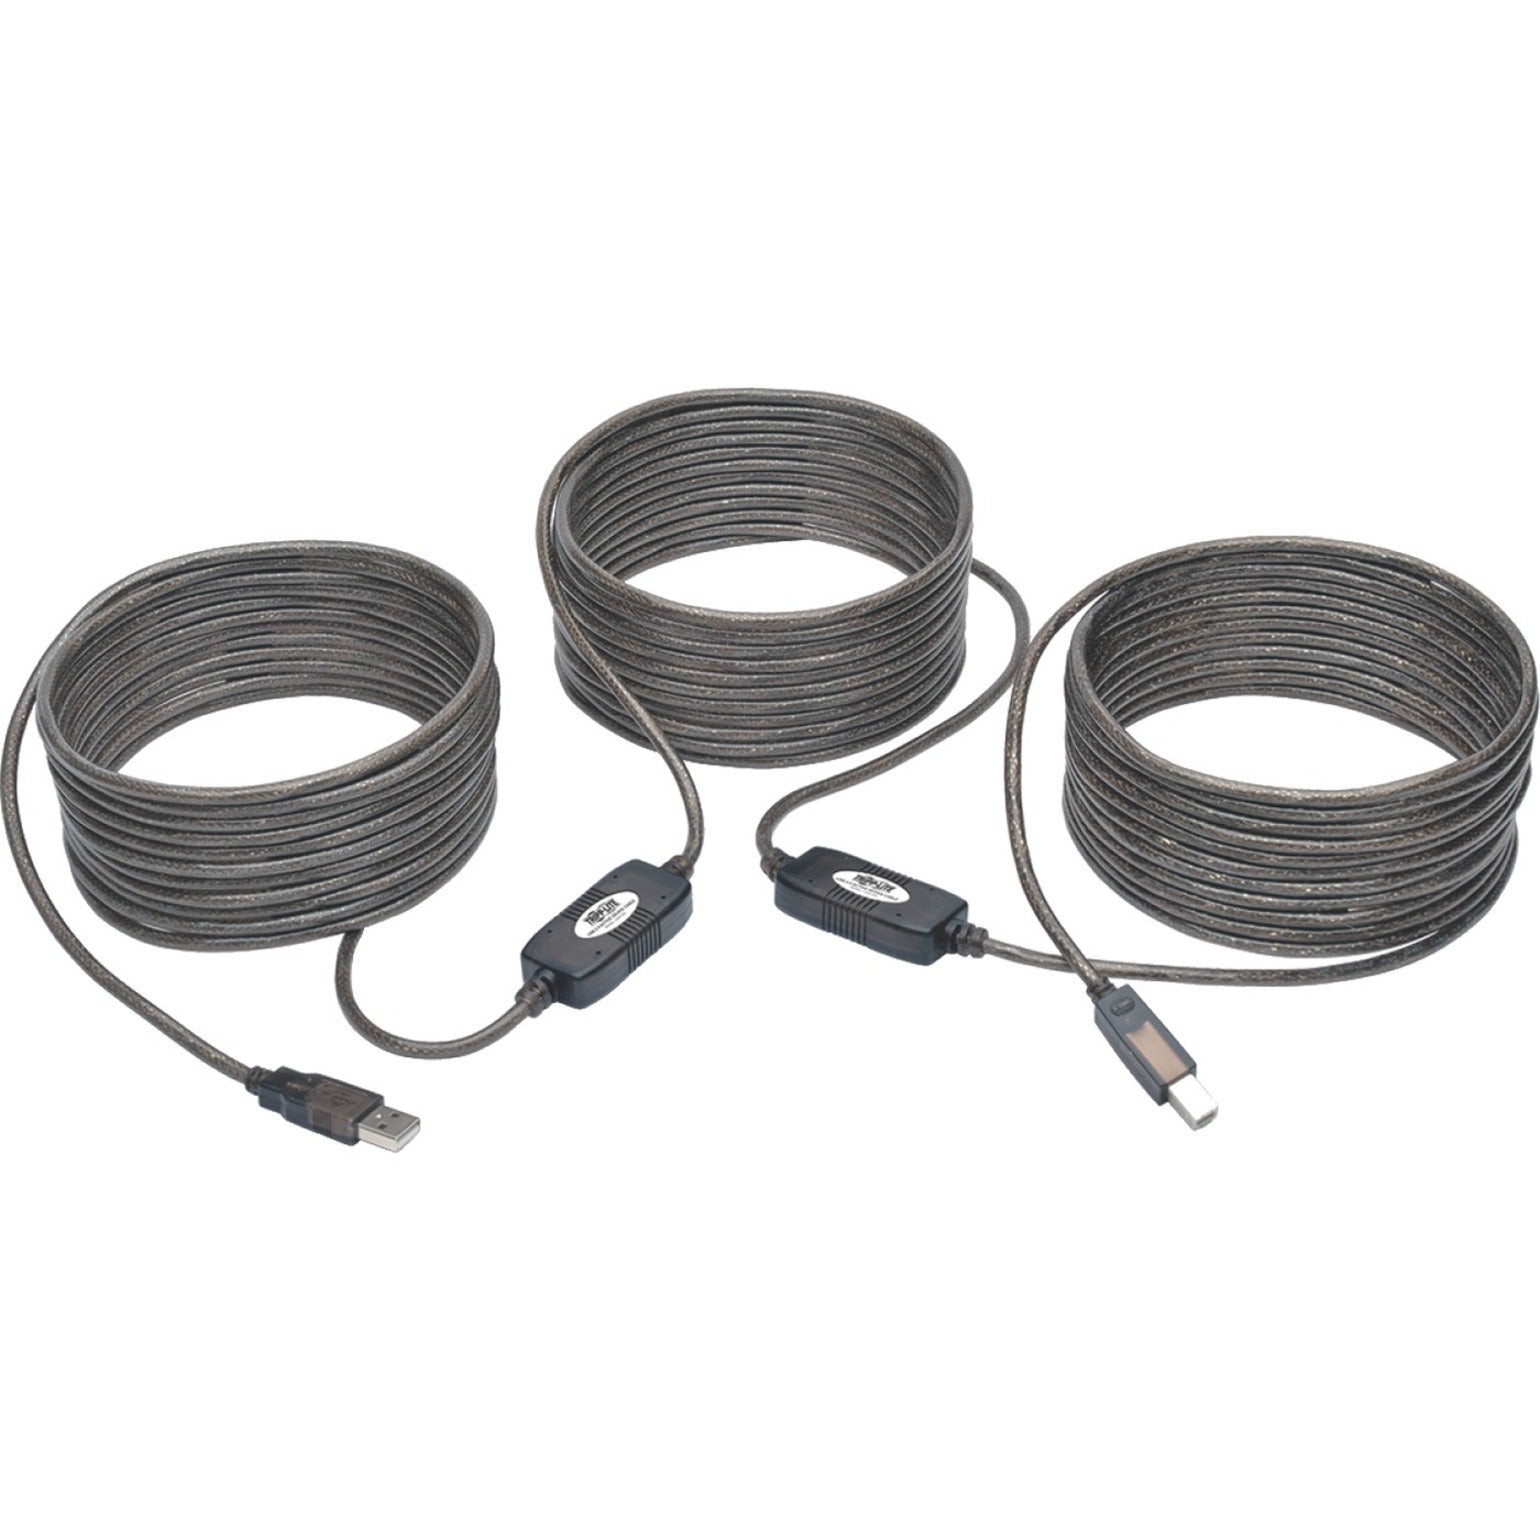 Tripp Lite U042-050 USB 2.0 Hi-Speed A/B Active Repeater Cable, 50 ft, Molded, Strain Relief, Silver